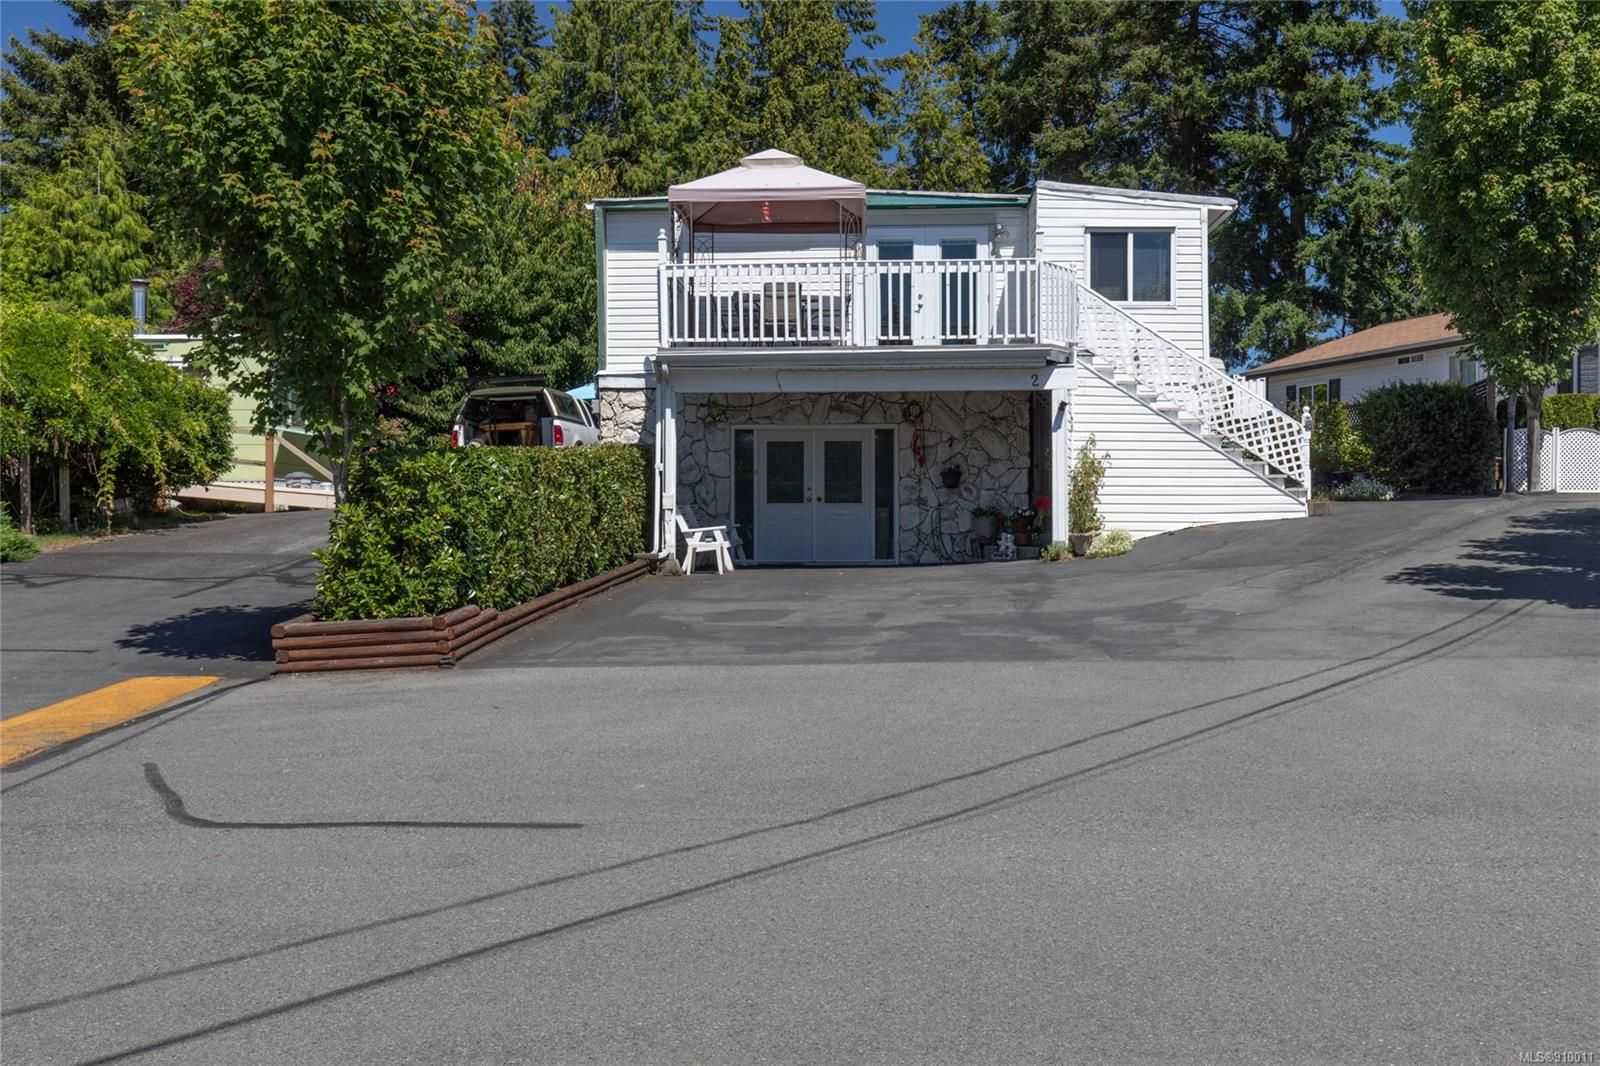 House in Campbell River, British Columbia 10843742